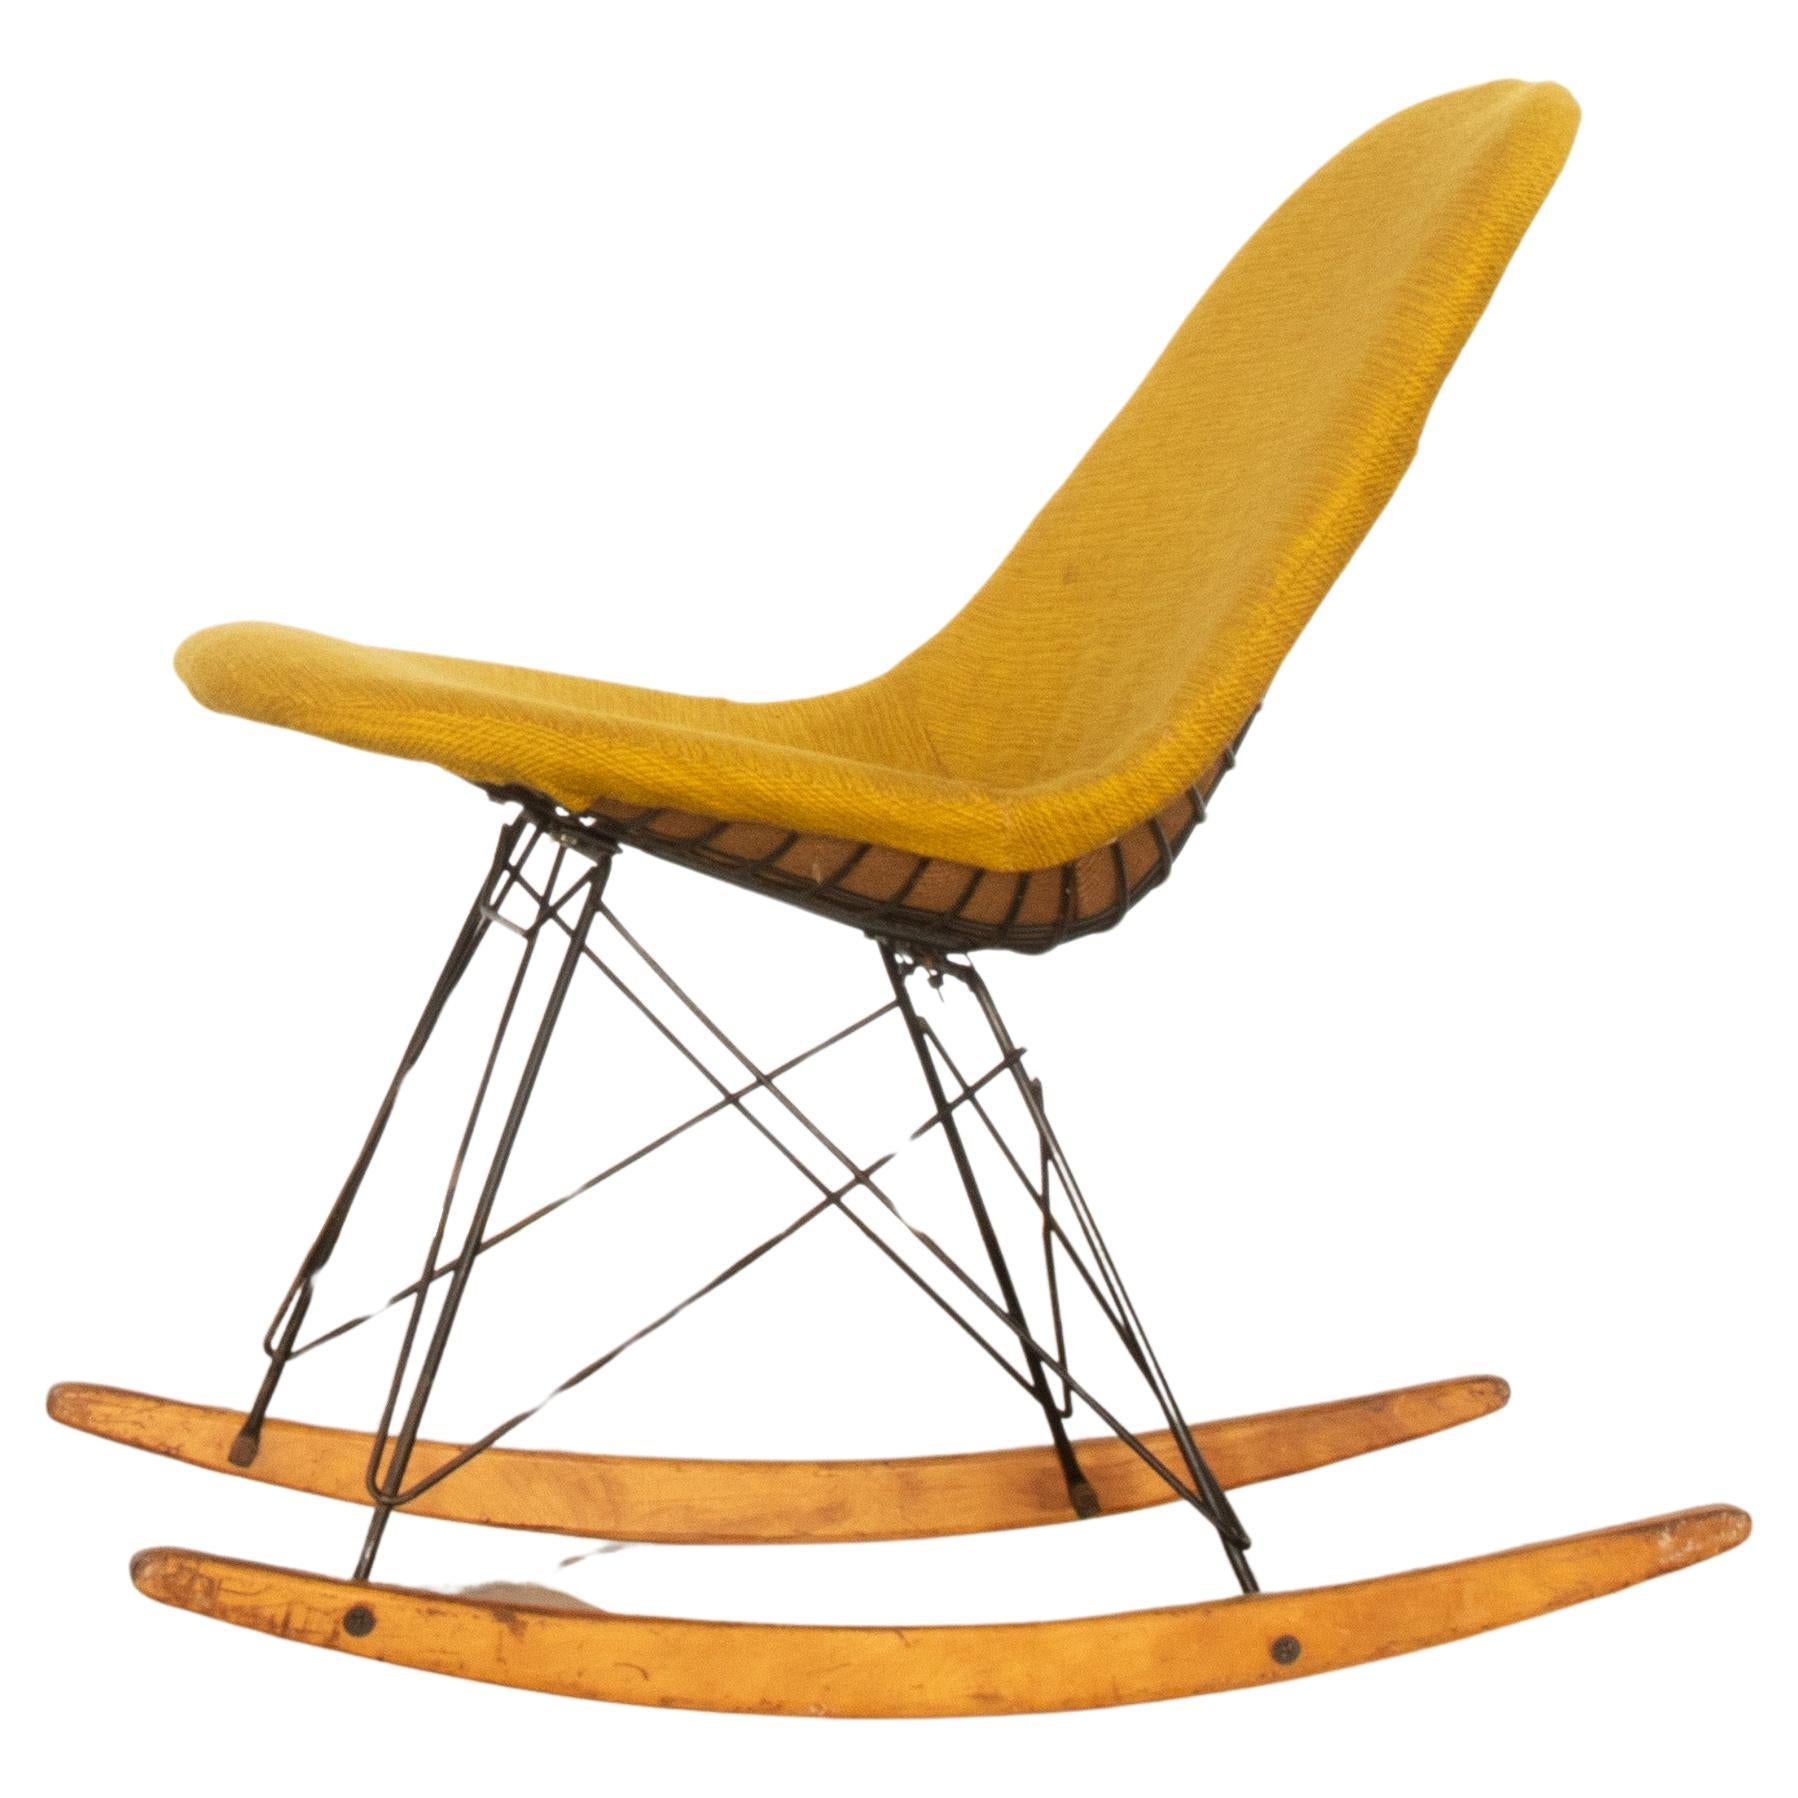 1950s Eames RKR Rocking Wire Side Chair with Yellow Hopsak original cover. For Sale